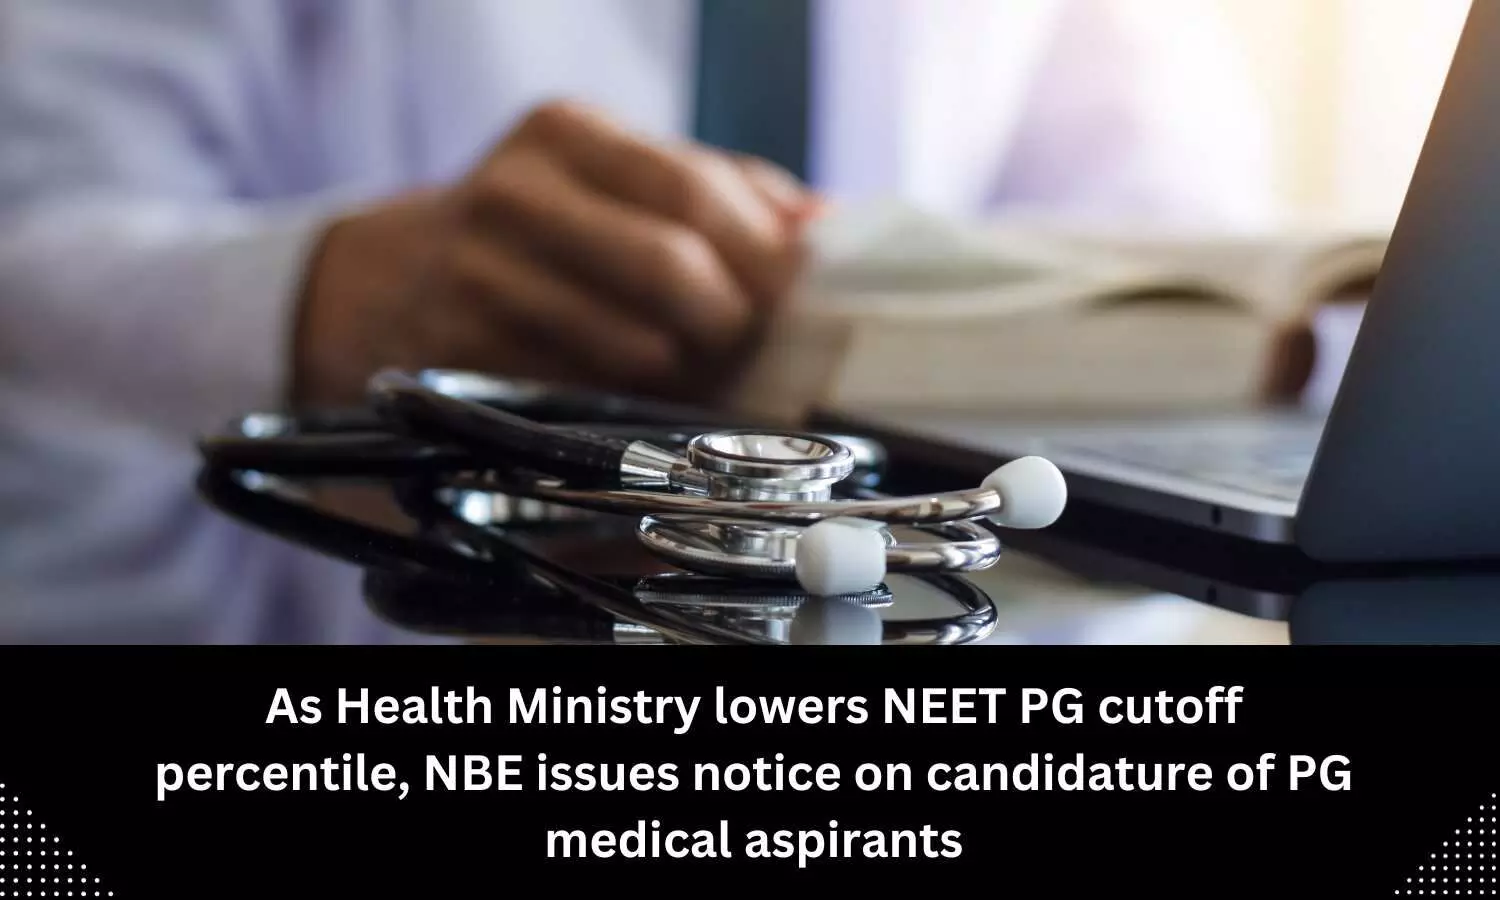 NBE issues notice on candidature of PG medical aspirants